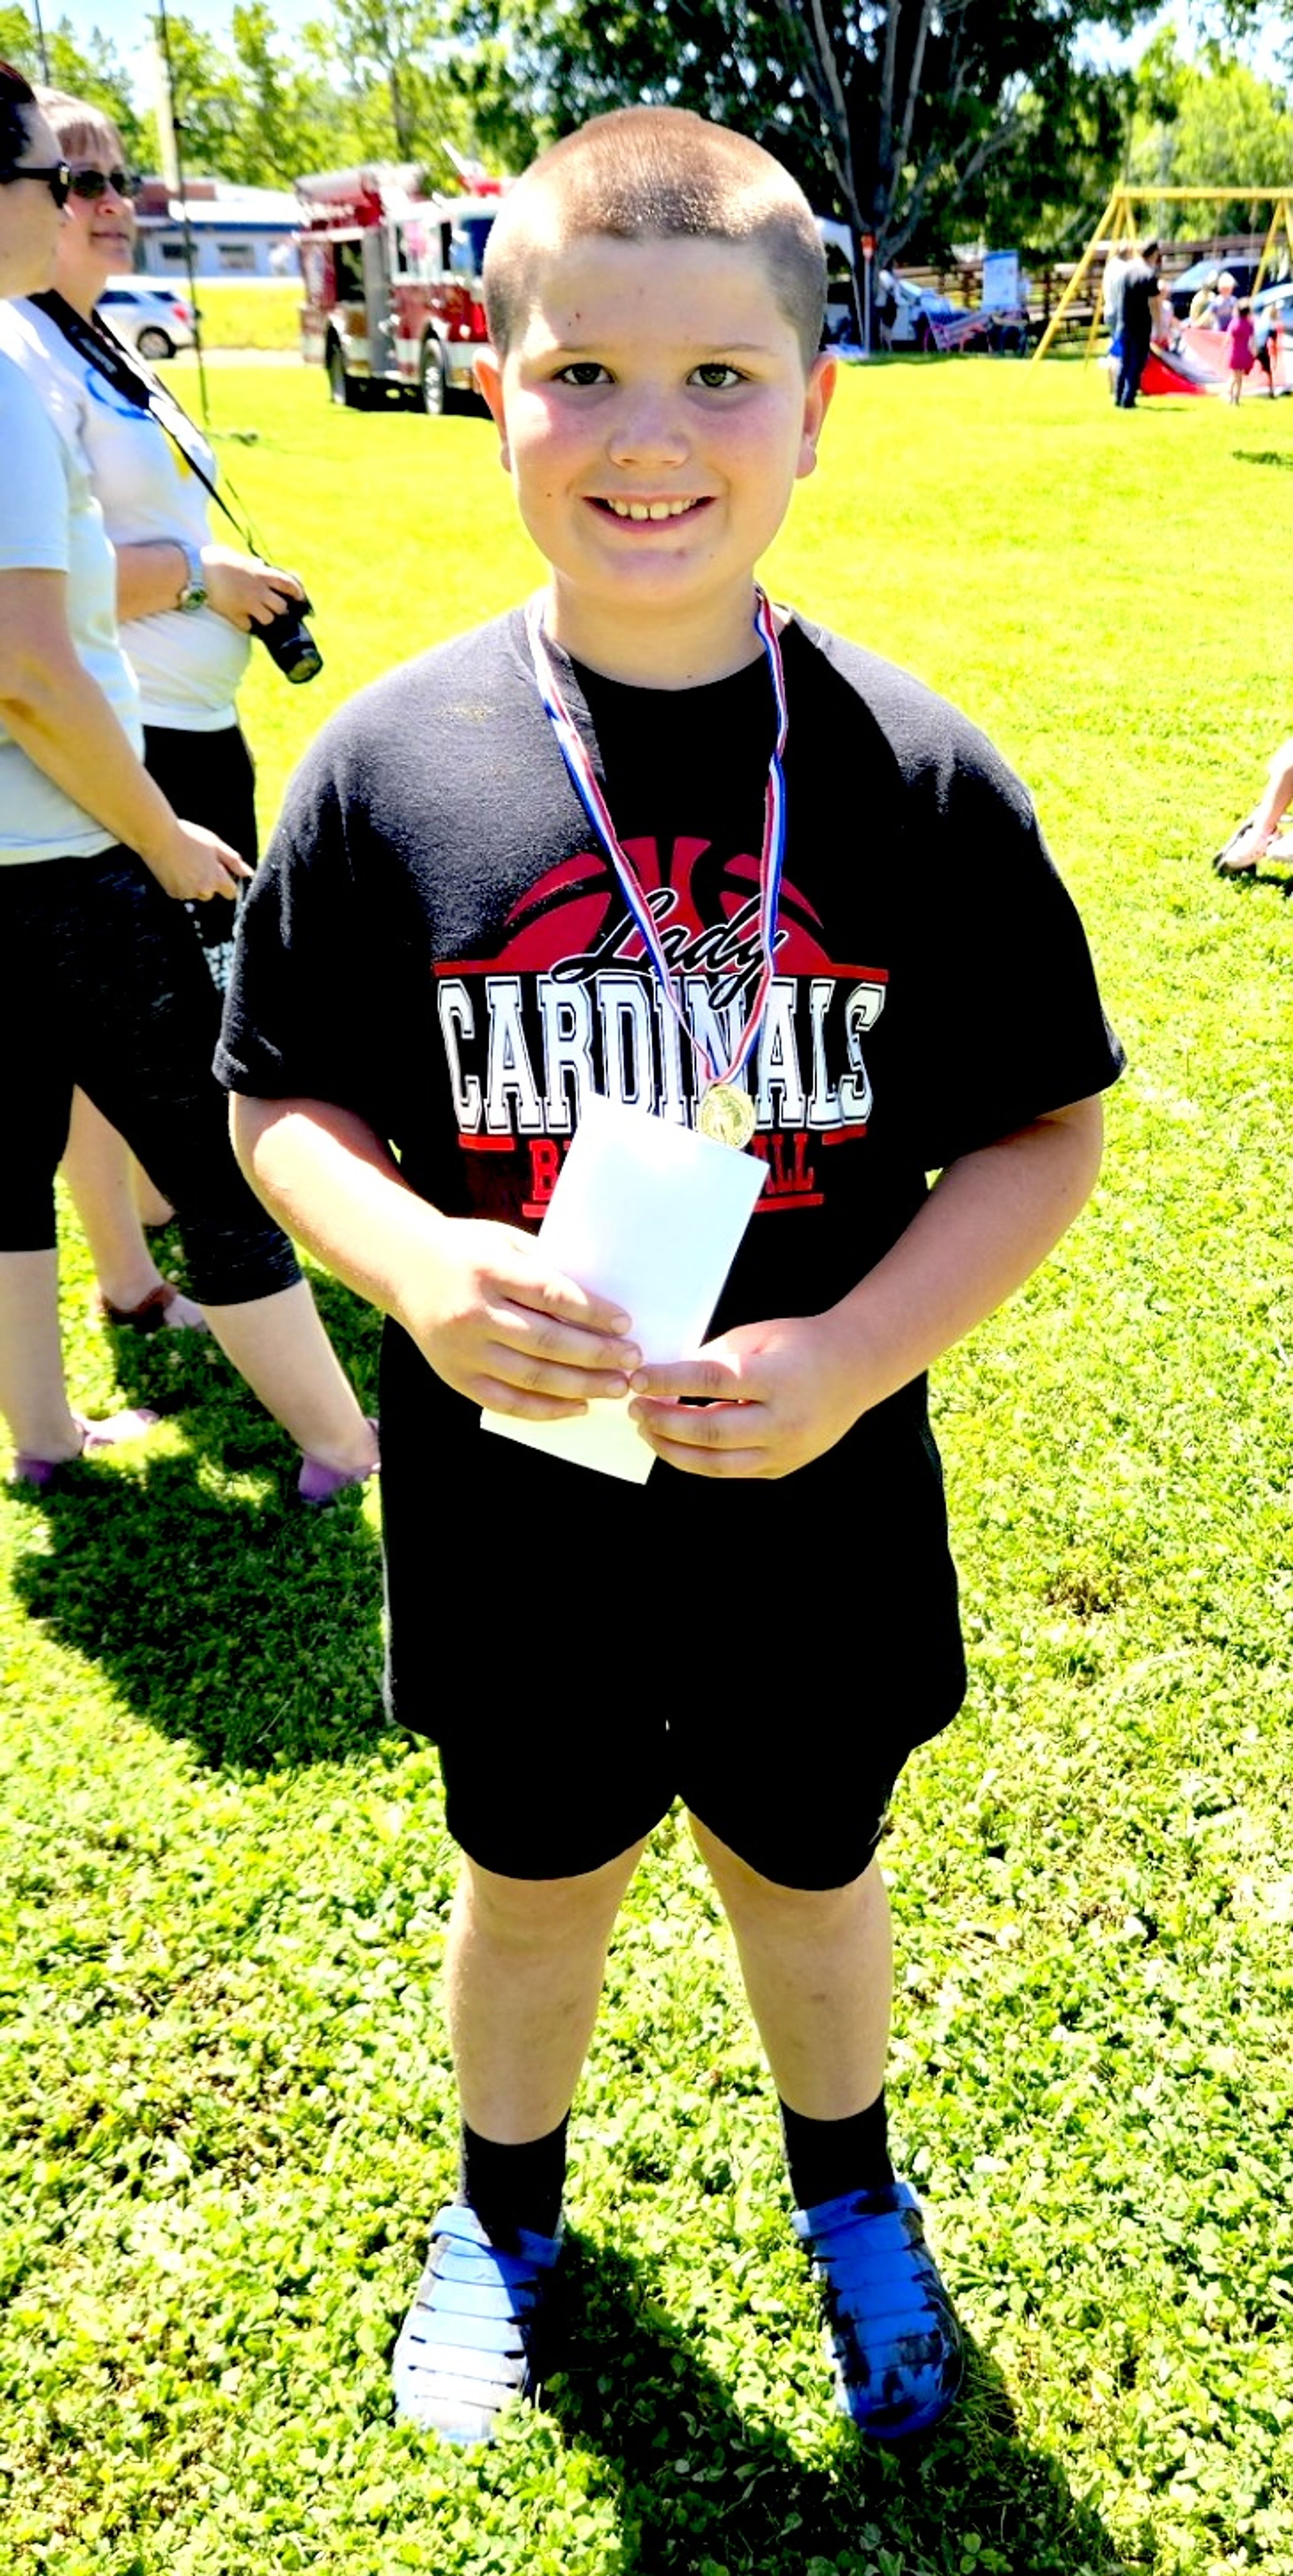 Talon Kinder is the first-place winner in the egg relay race for his age division (6 to 12).